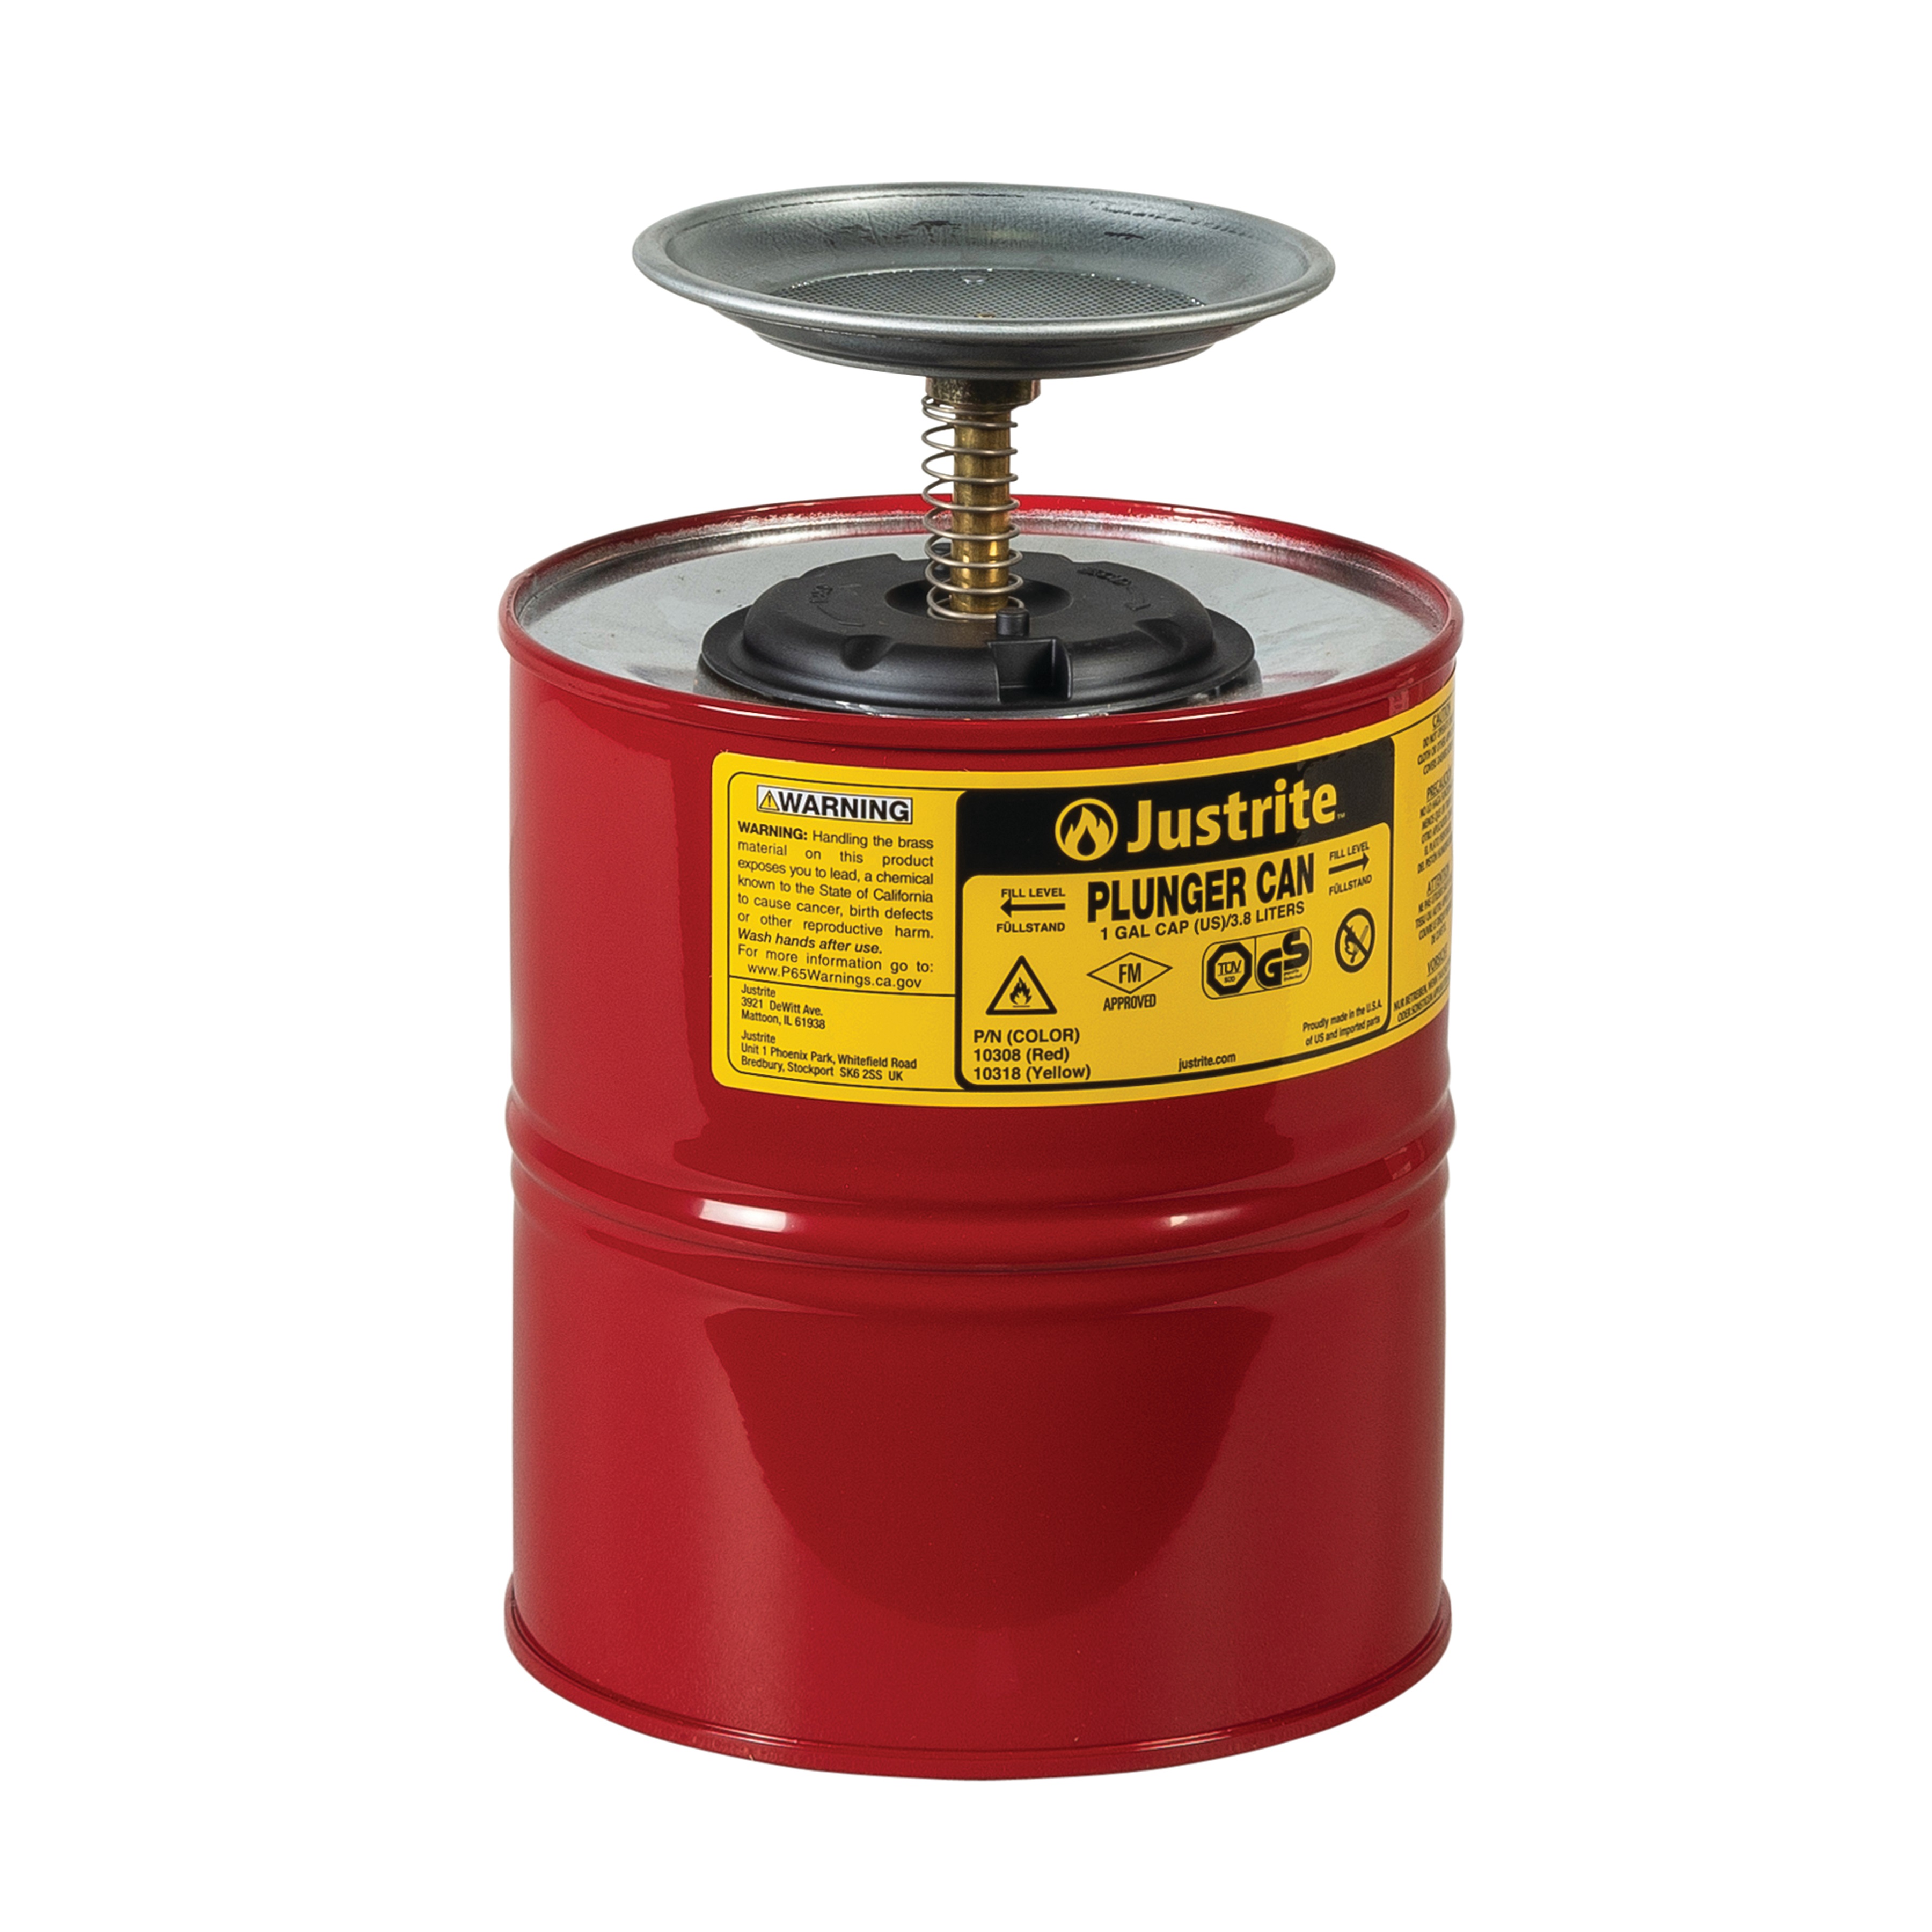 Justrite Safety Plunger Cans - Red - Spill Containment